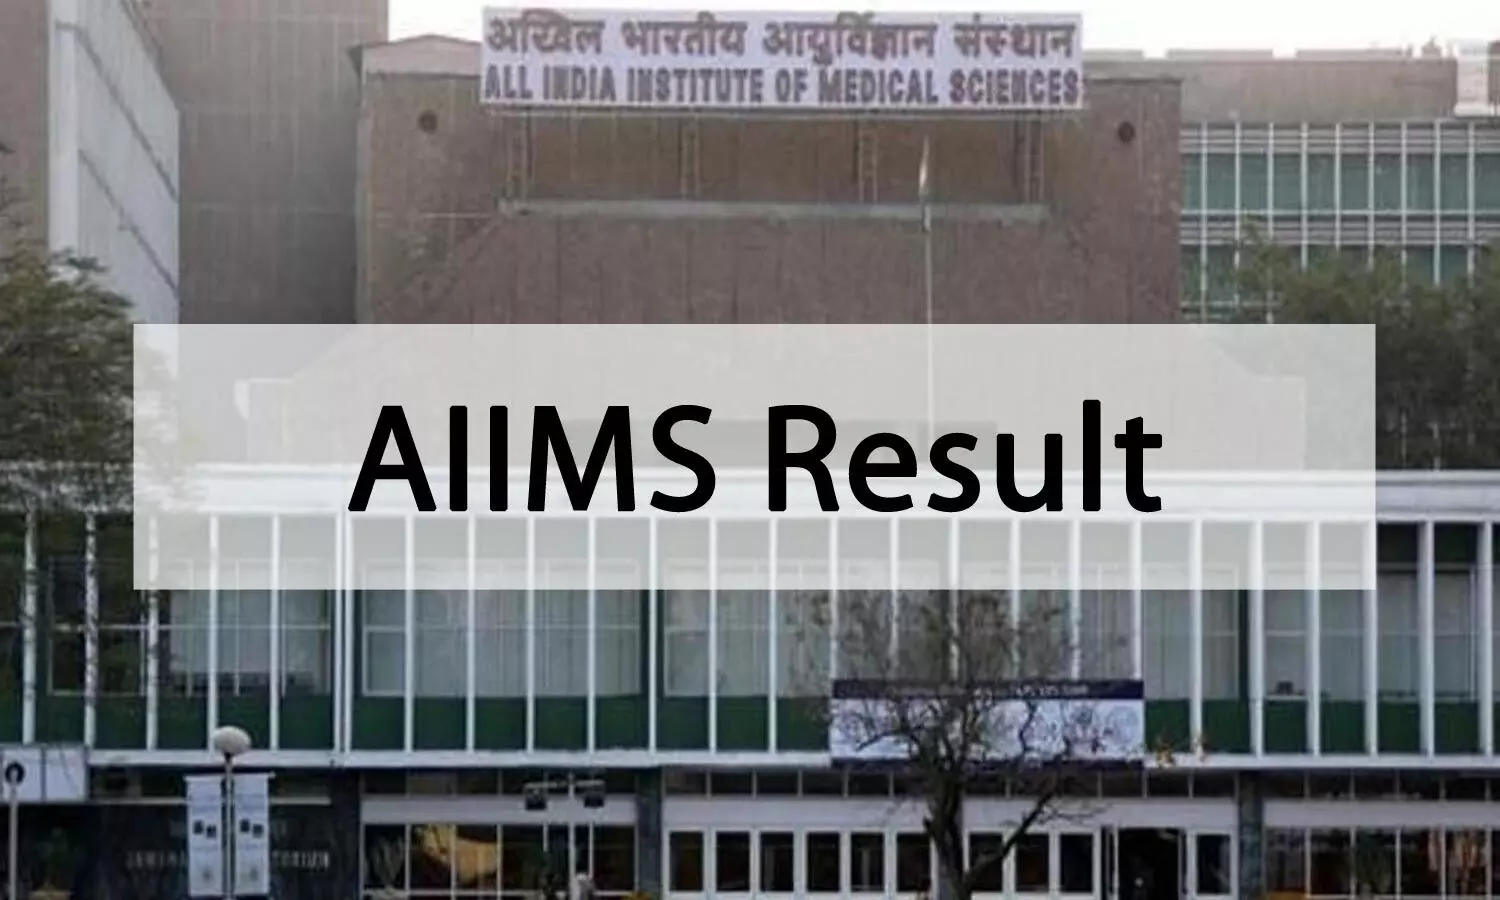 Final Result of AIIMS Fellowship Programme Entrance Examination Jan 2021 Session released